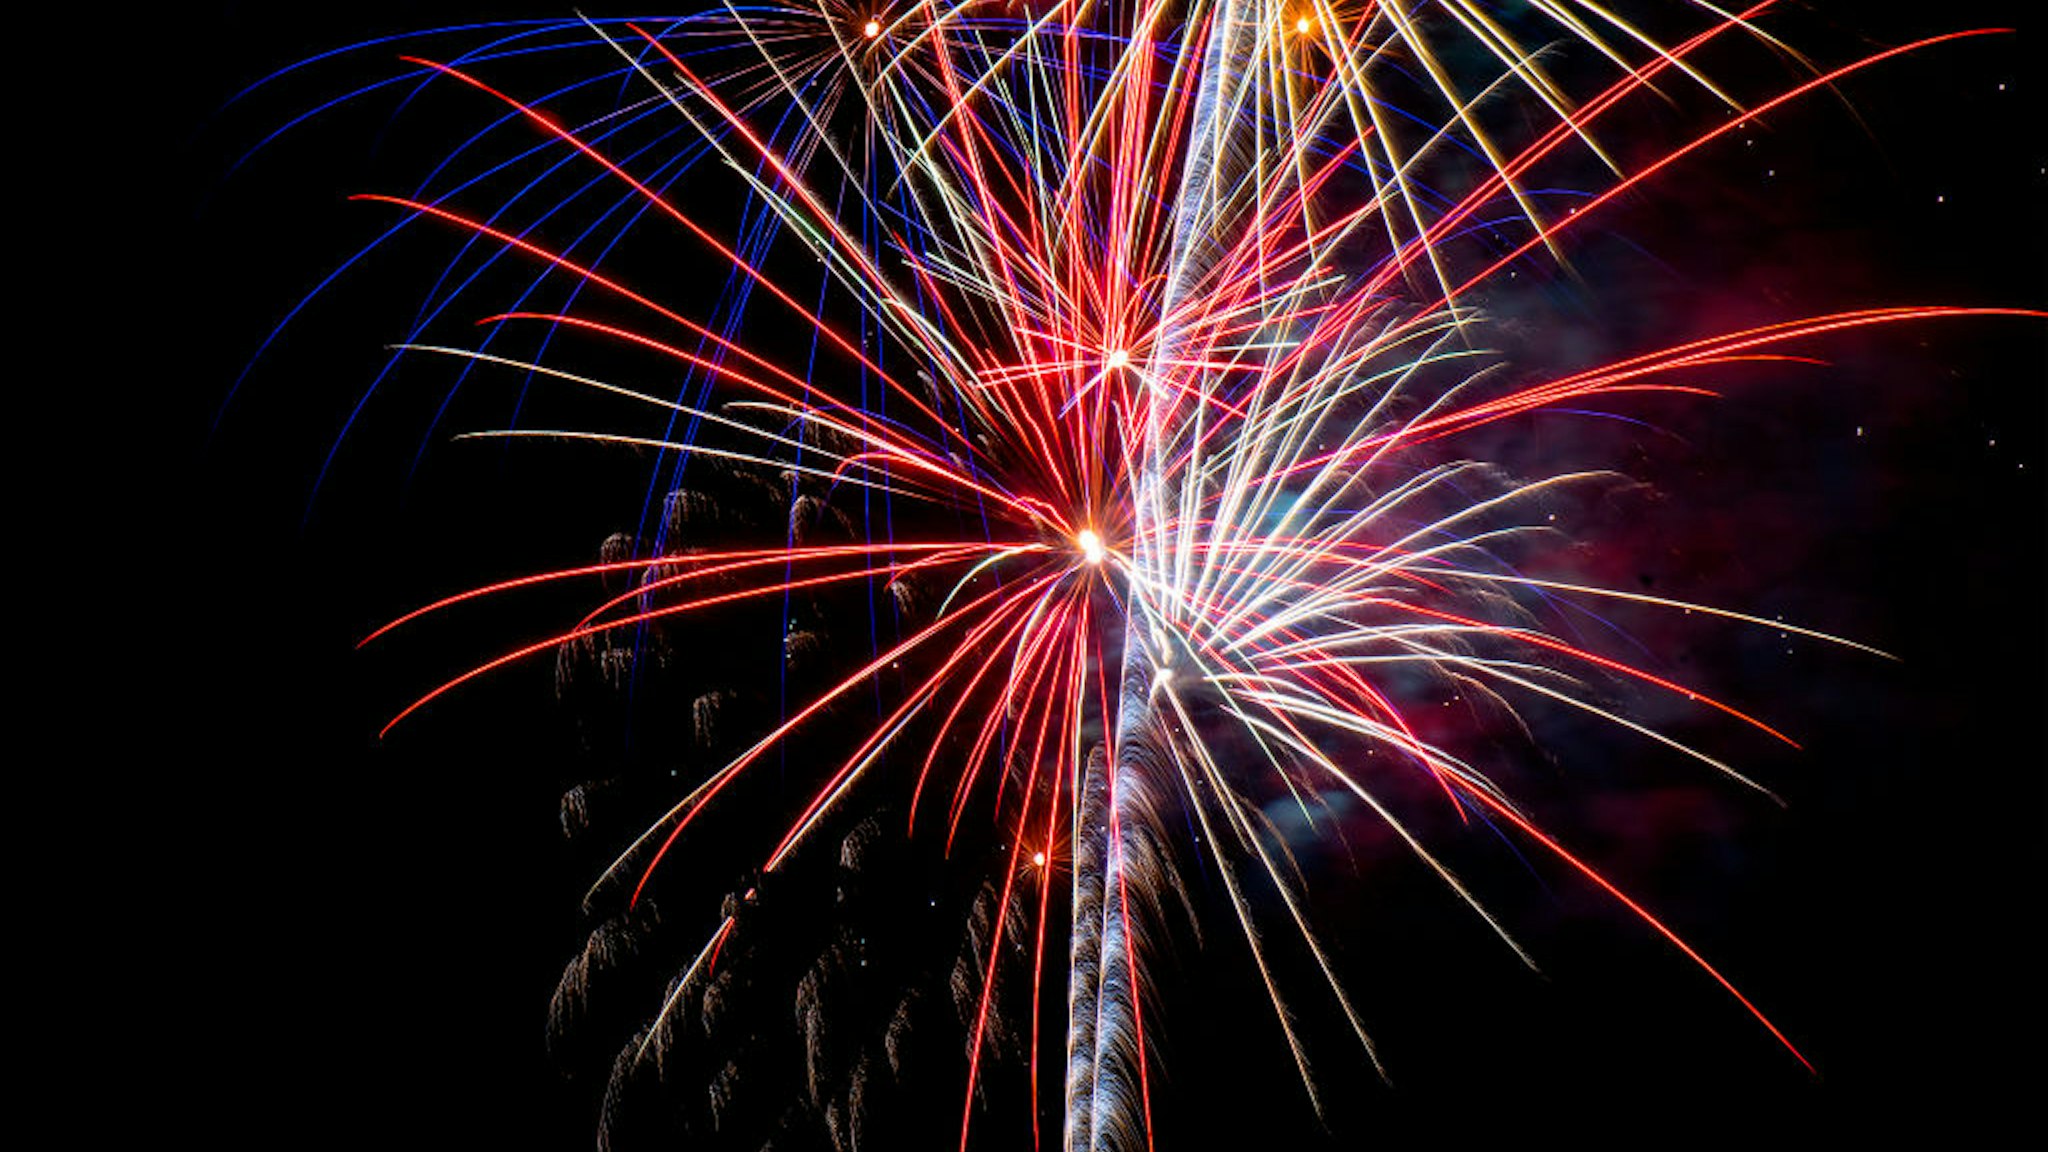 MURRIETA, CA - JULY 02: God Bless America plays through the radio as red, white and blue fireworks light up the sky during Murrietas Independence Day/Birthday Bash at Los Alamos Hills Sports Park on Thursday, July 1, 2021. (Photo by Cindy Yamanaka/MediaNews Group/The Riverside Press-Enterprise via Getty Images)